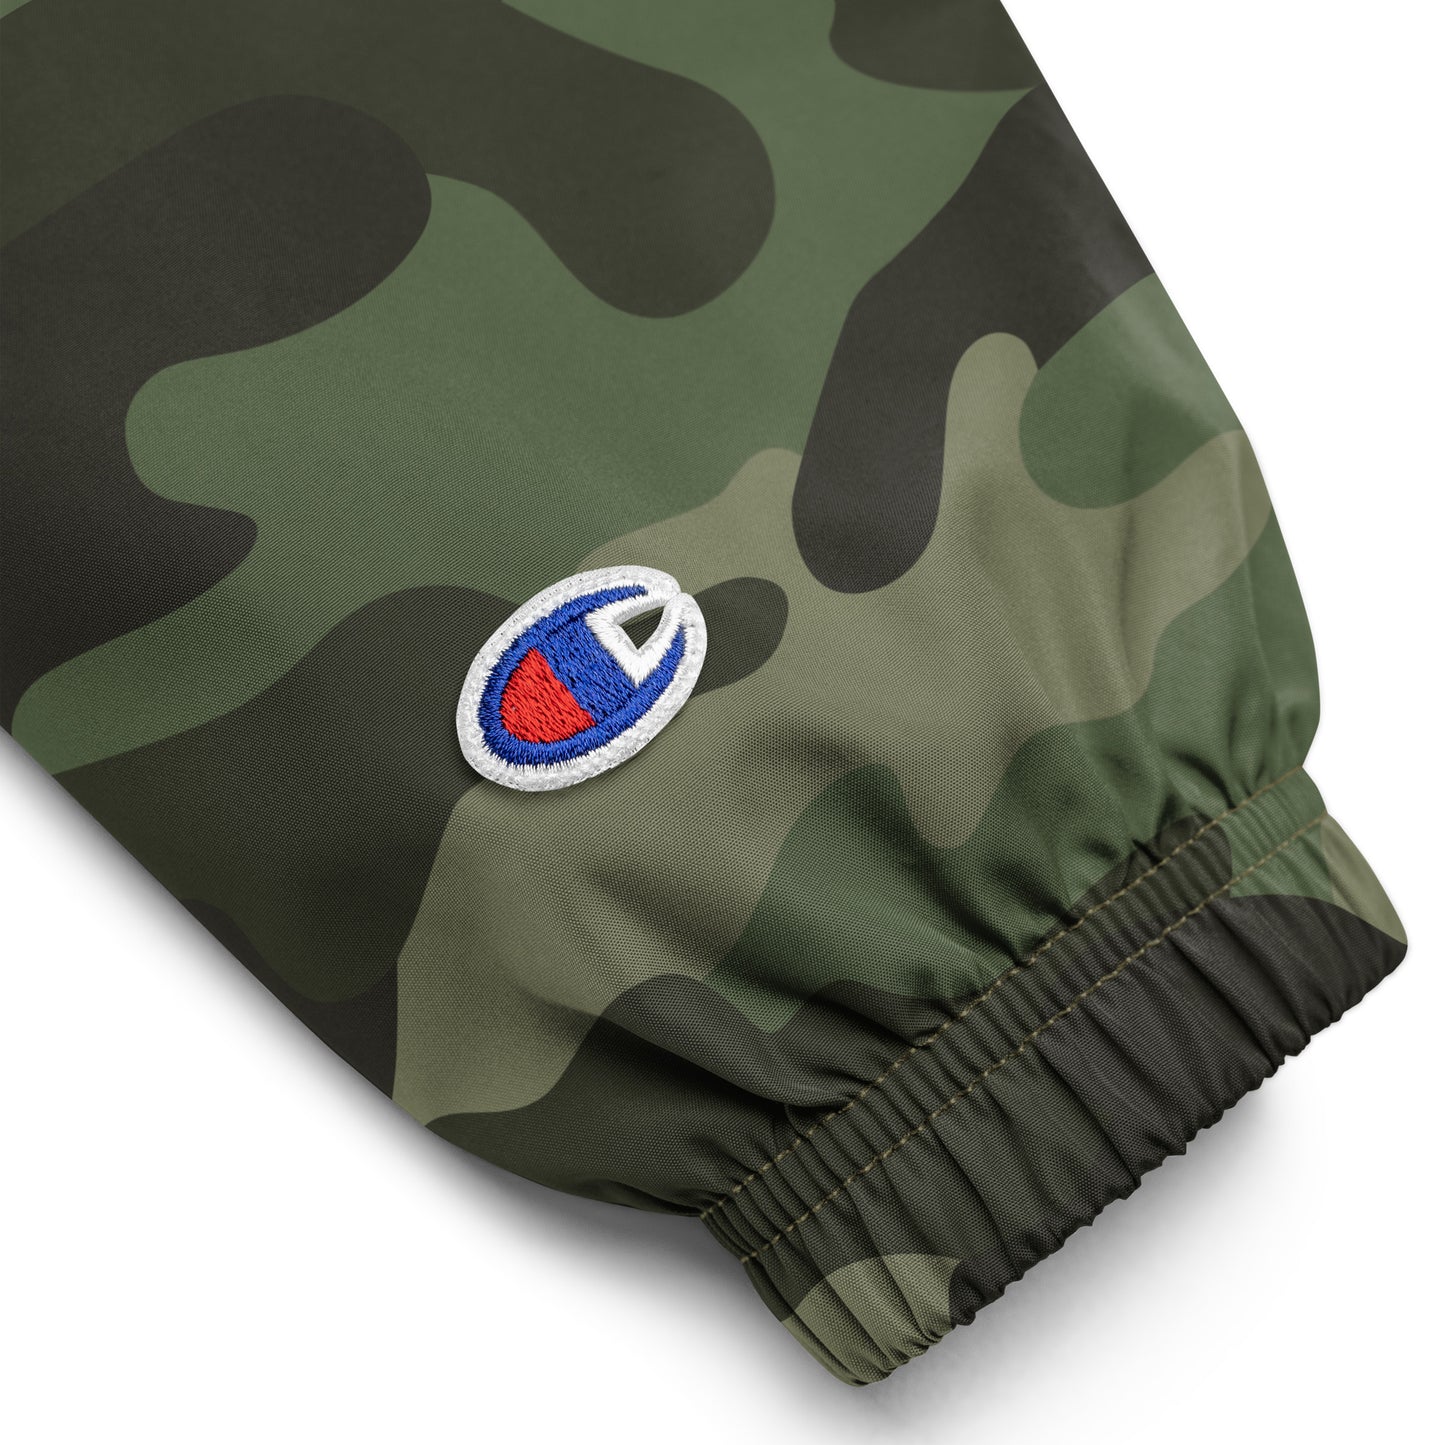 CBCF Packable Jacket by Champion